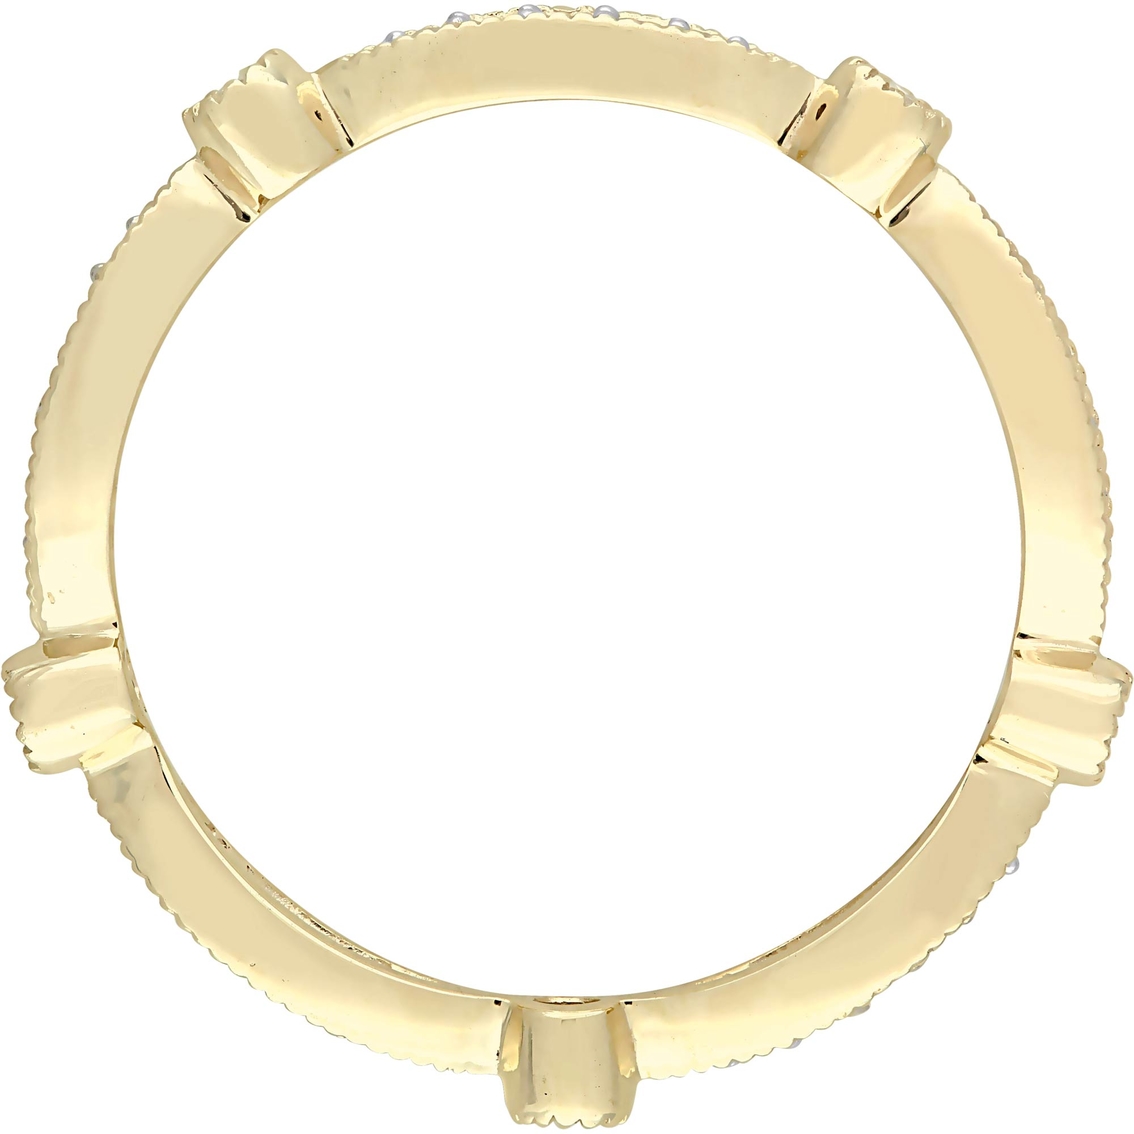 1/4 CT TW Diamond Stackable Anniversary Band in 10k Yellow Gold - Image 3 of 4